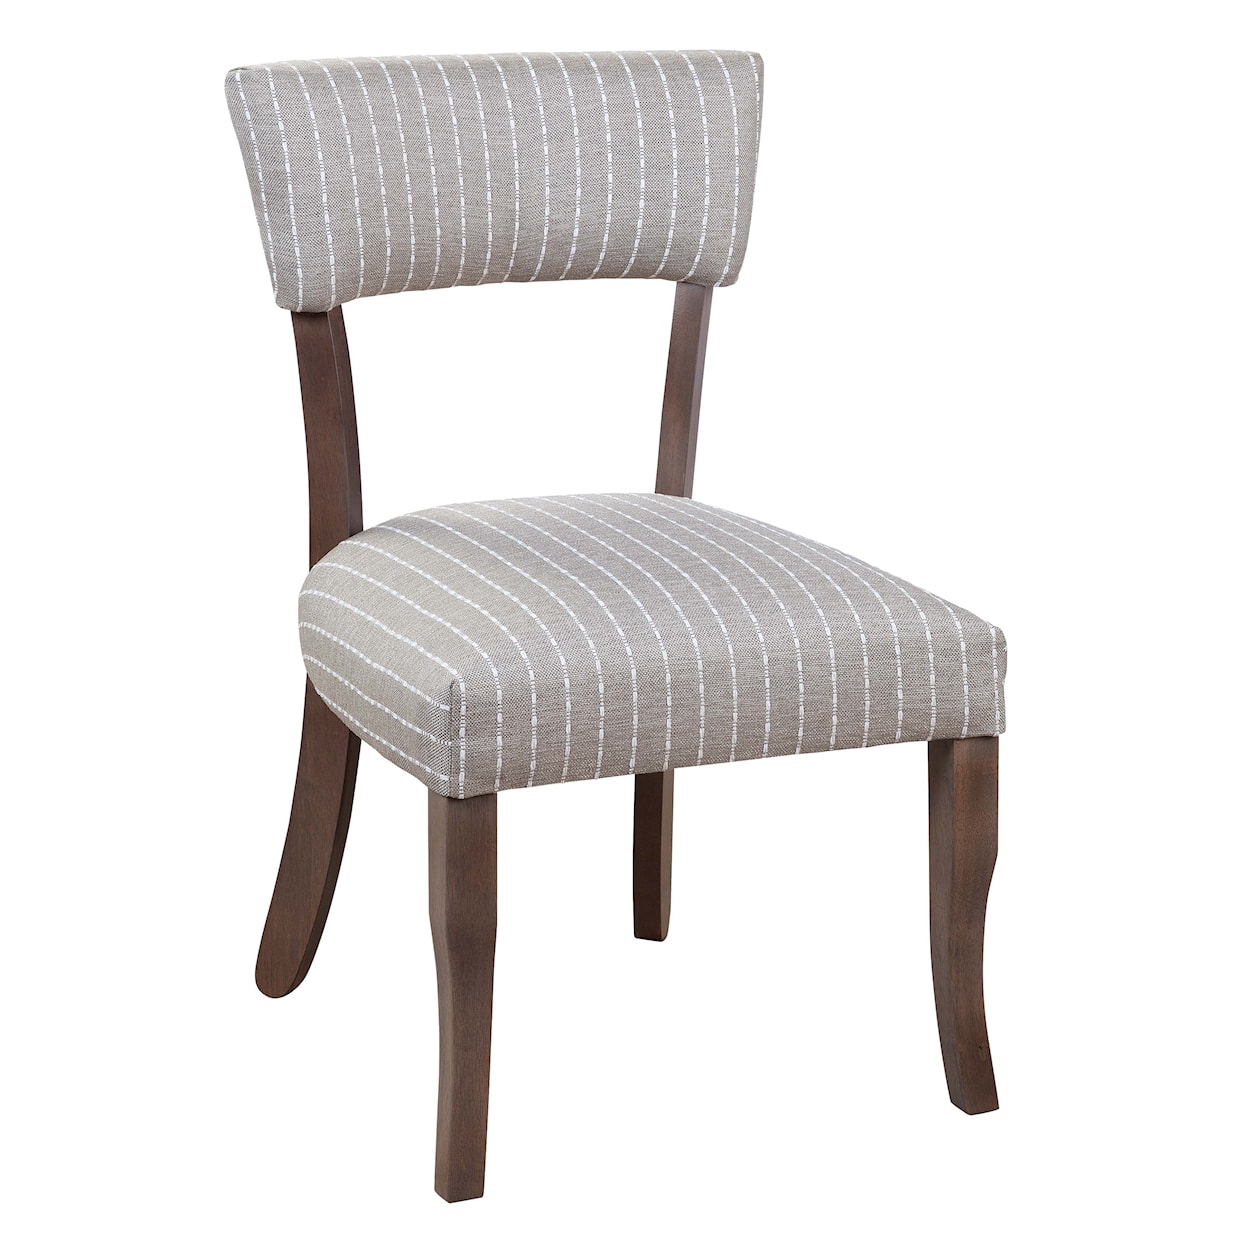 Hekman Scottsdale Upholstered Dining Chair